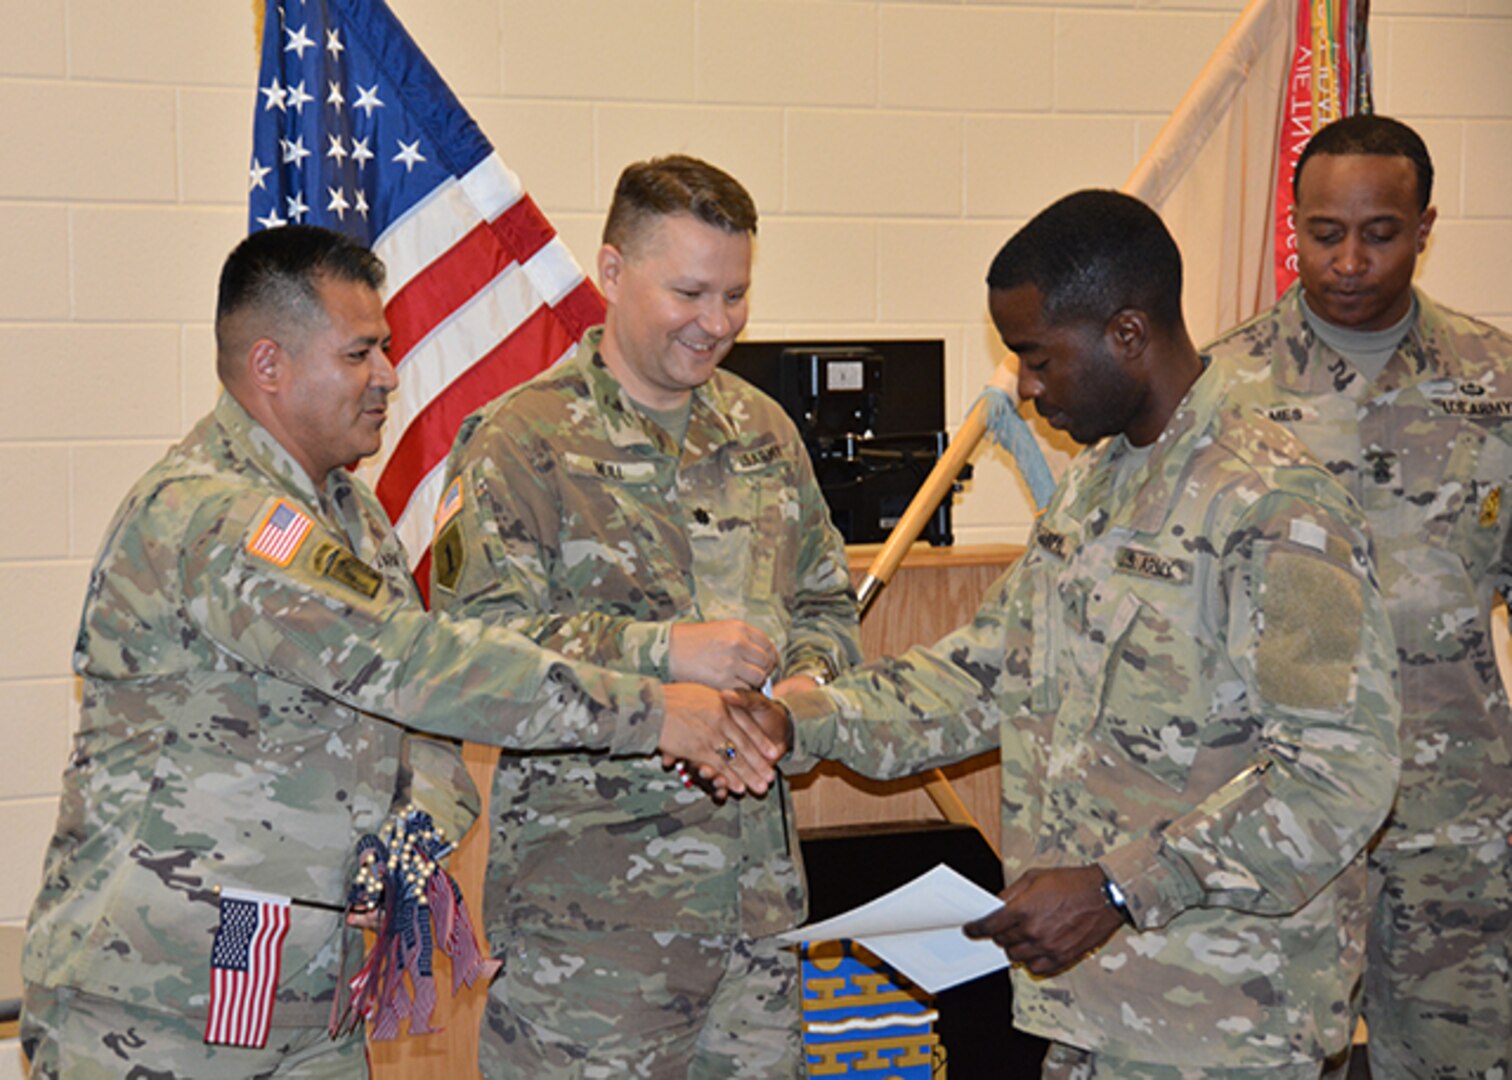 Defense Logistics Agency Aviation Army Maj.  Alex Shimabukuro shakes the hand of Army Private 1st Class Didier Martel Florestal, a native of Haiti, during his naturalization ceremony May 30, 2017 at Fort Lee, Virginia’s Soldier Support Center. Also pictured:  Army Lt. Col. Brian Neill, commander, 266th Quartermaster Battalion, center, and 266th Battalion Command Sergeant Major James Holmes, right.